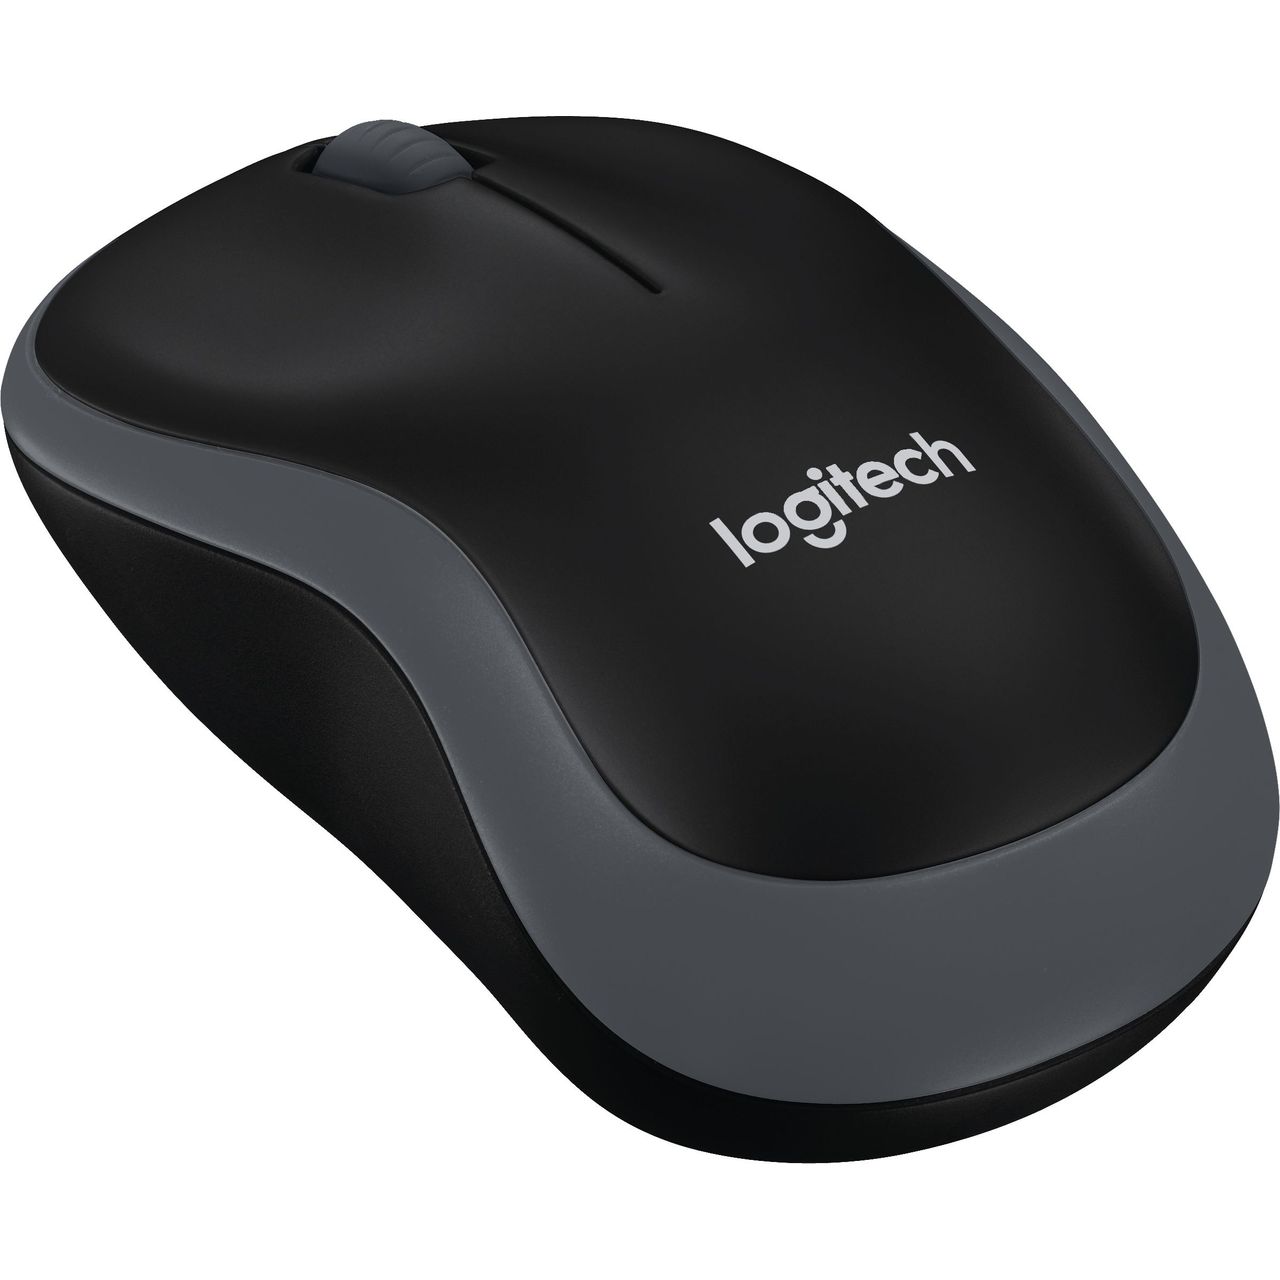 Logitech M185 Wireless USB Optical Mouse Review